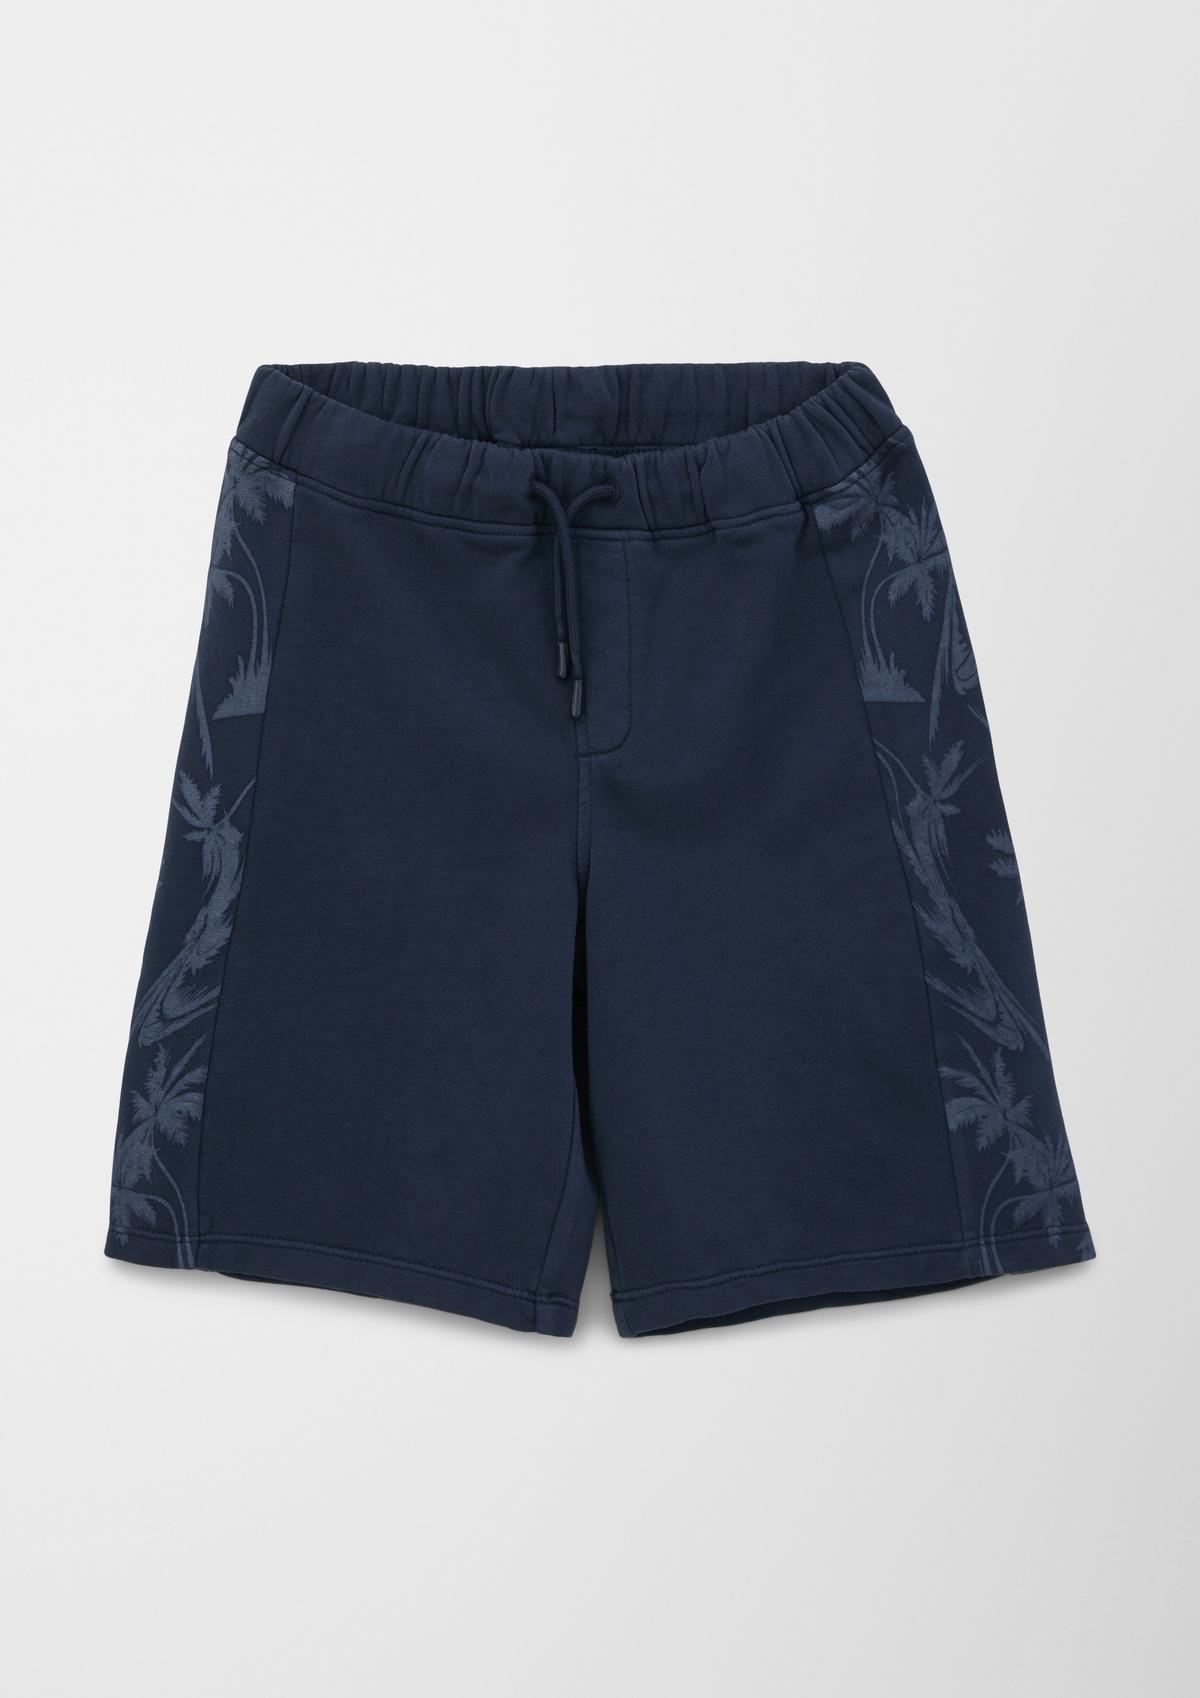 Find Bermuda online for shorts teens and boys